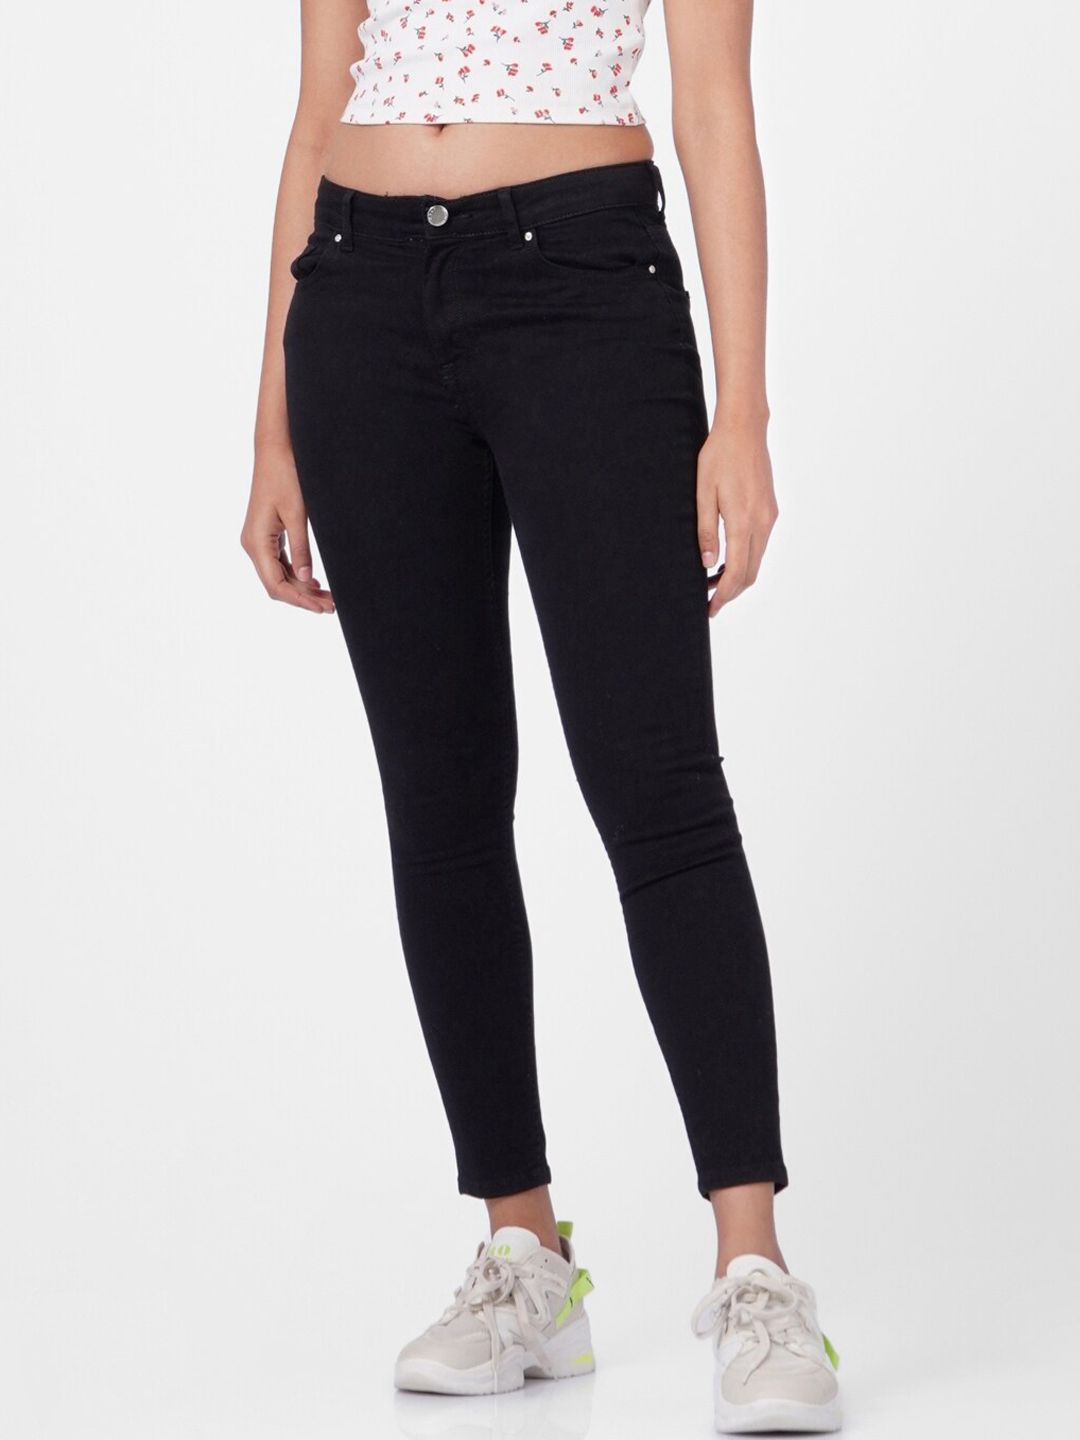 ONLY Women Black High-Rise Stretchable Jeans Price in India